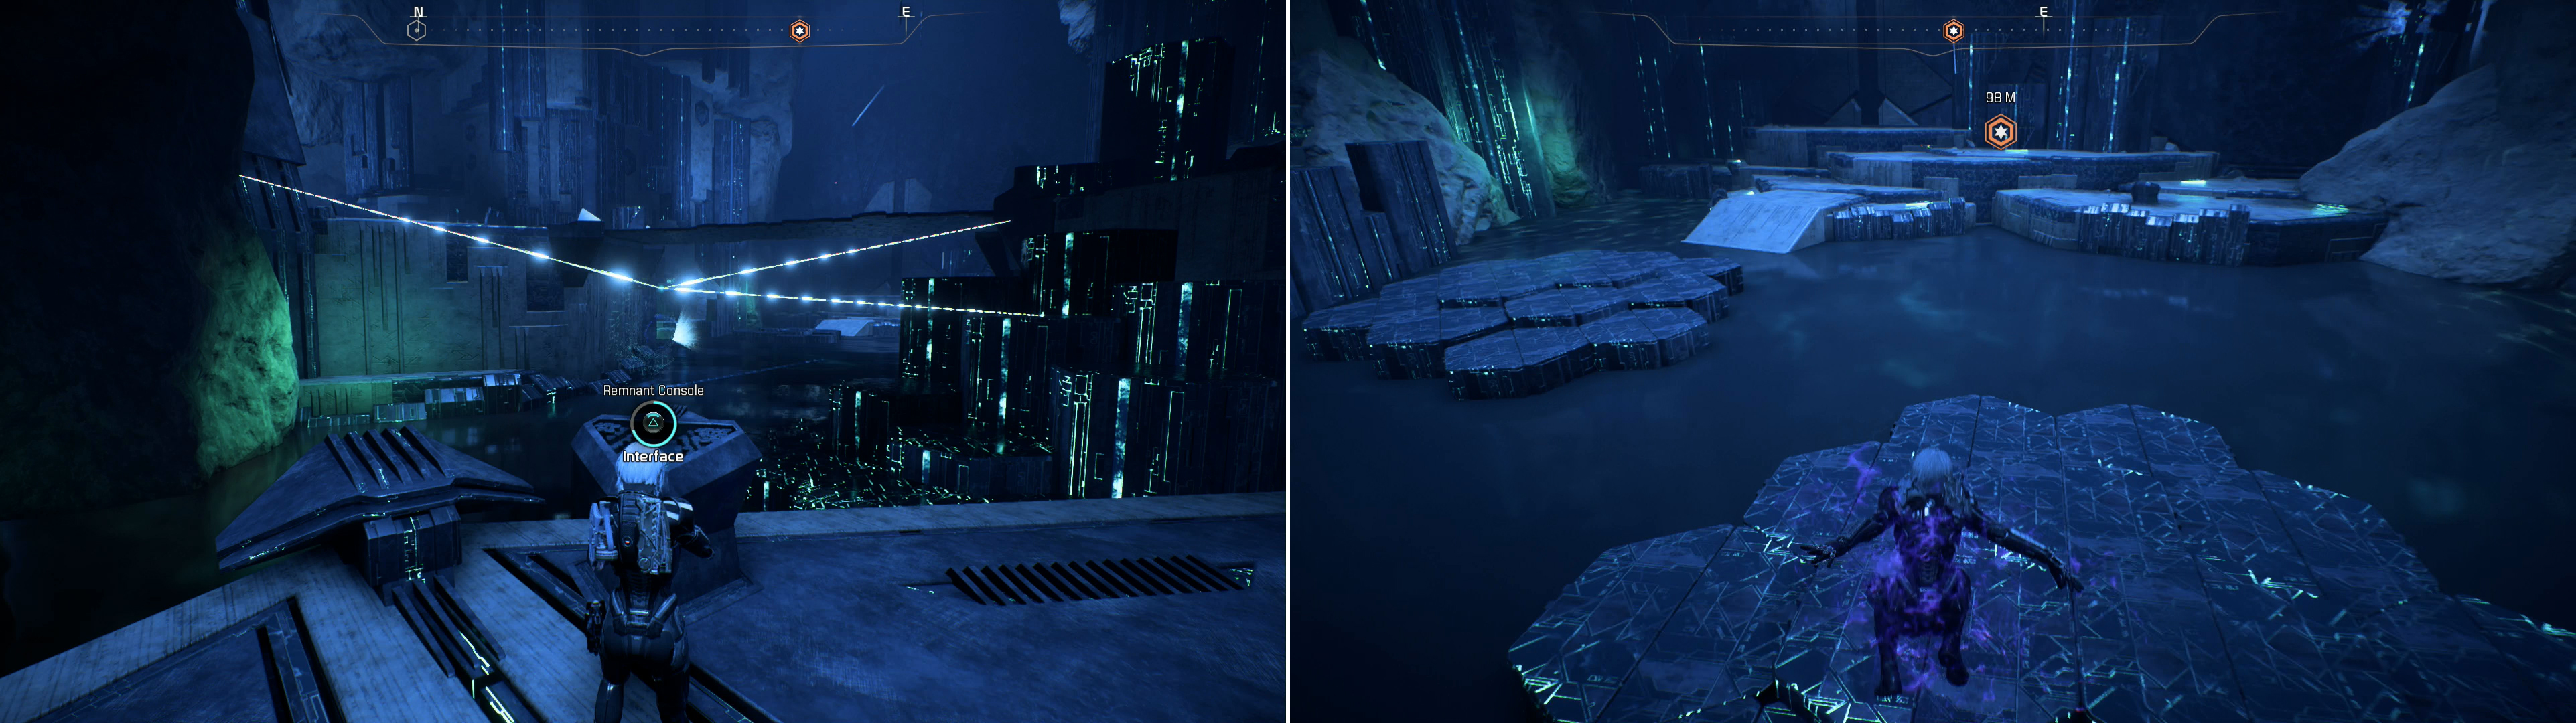 Return to the beginning of the vault and activate the previously ignored Remnant Console (left) then leap across the lily pad platforms deployed by aforementioned console (right).